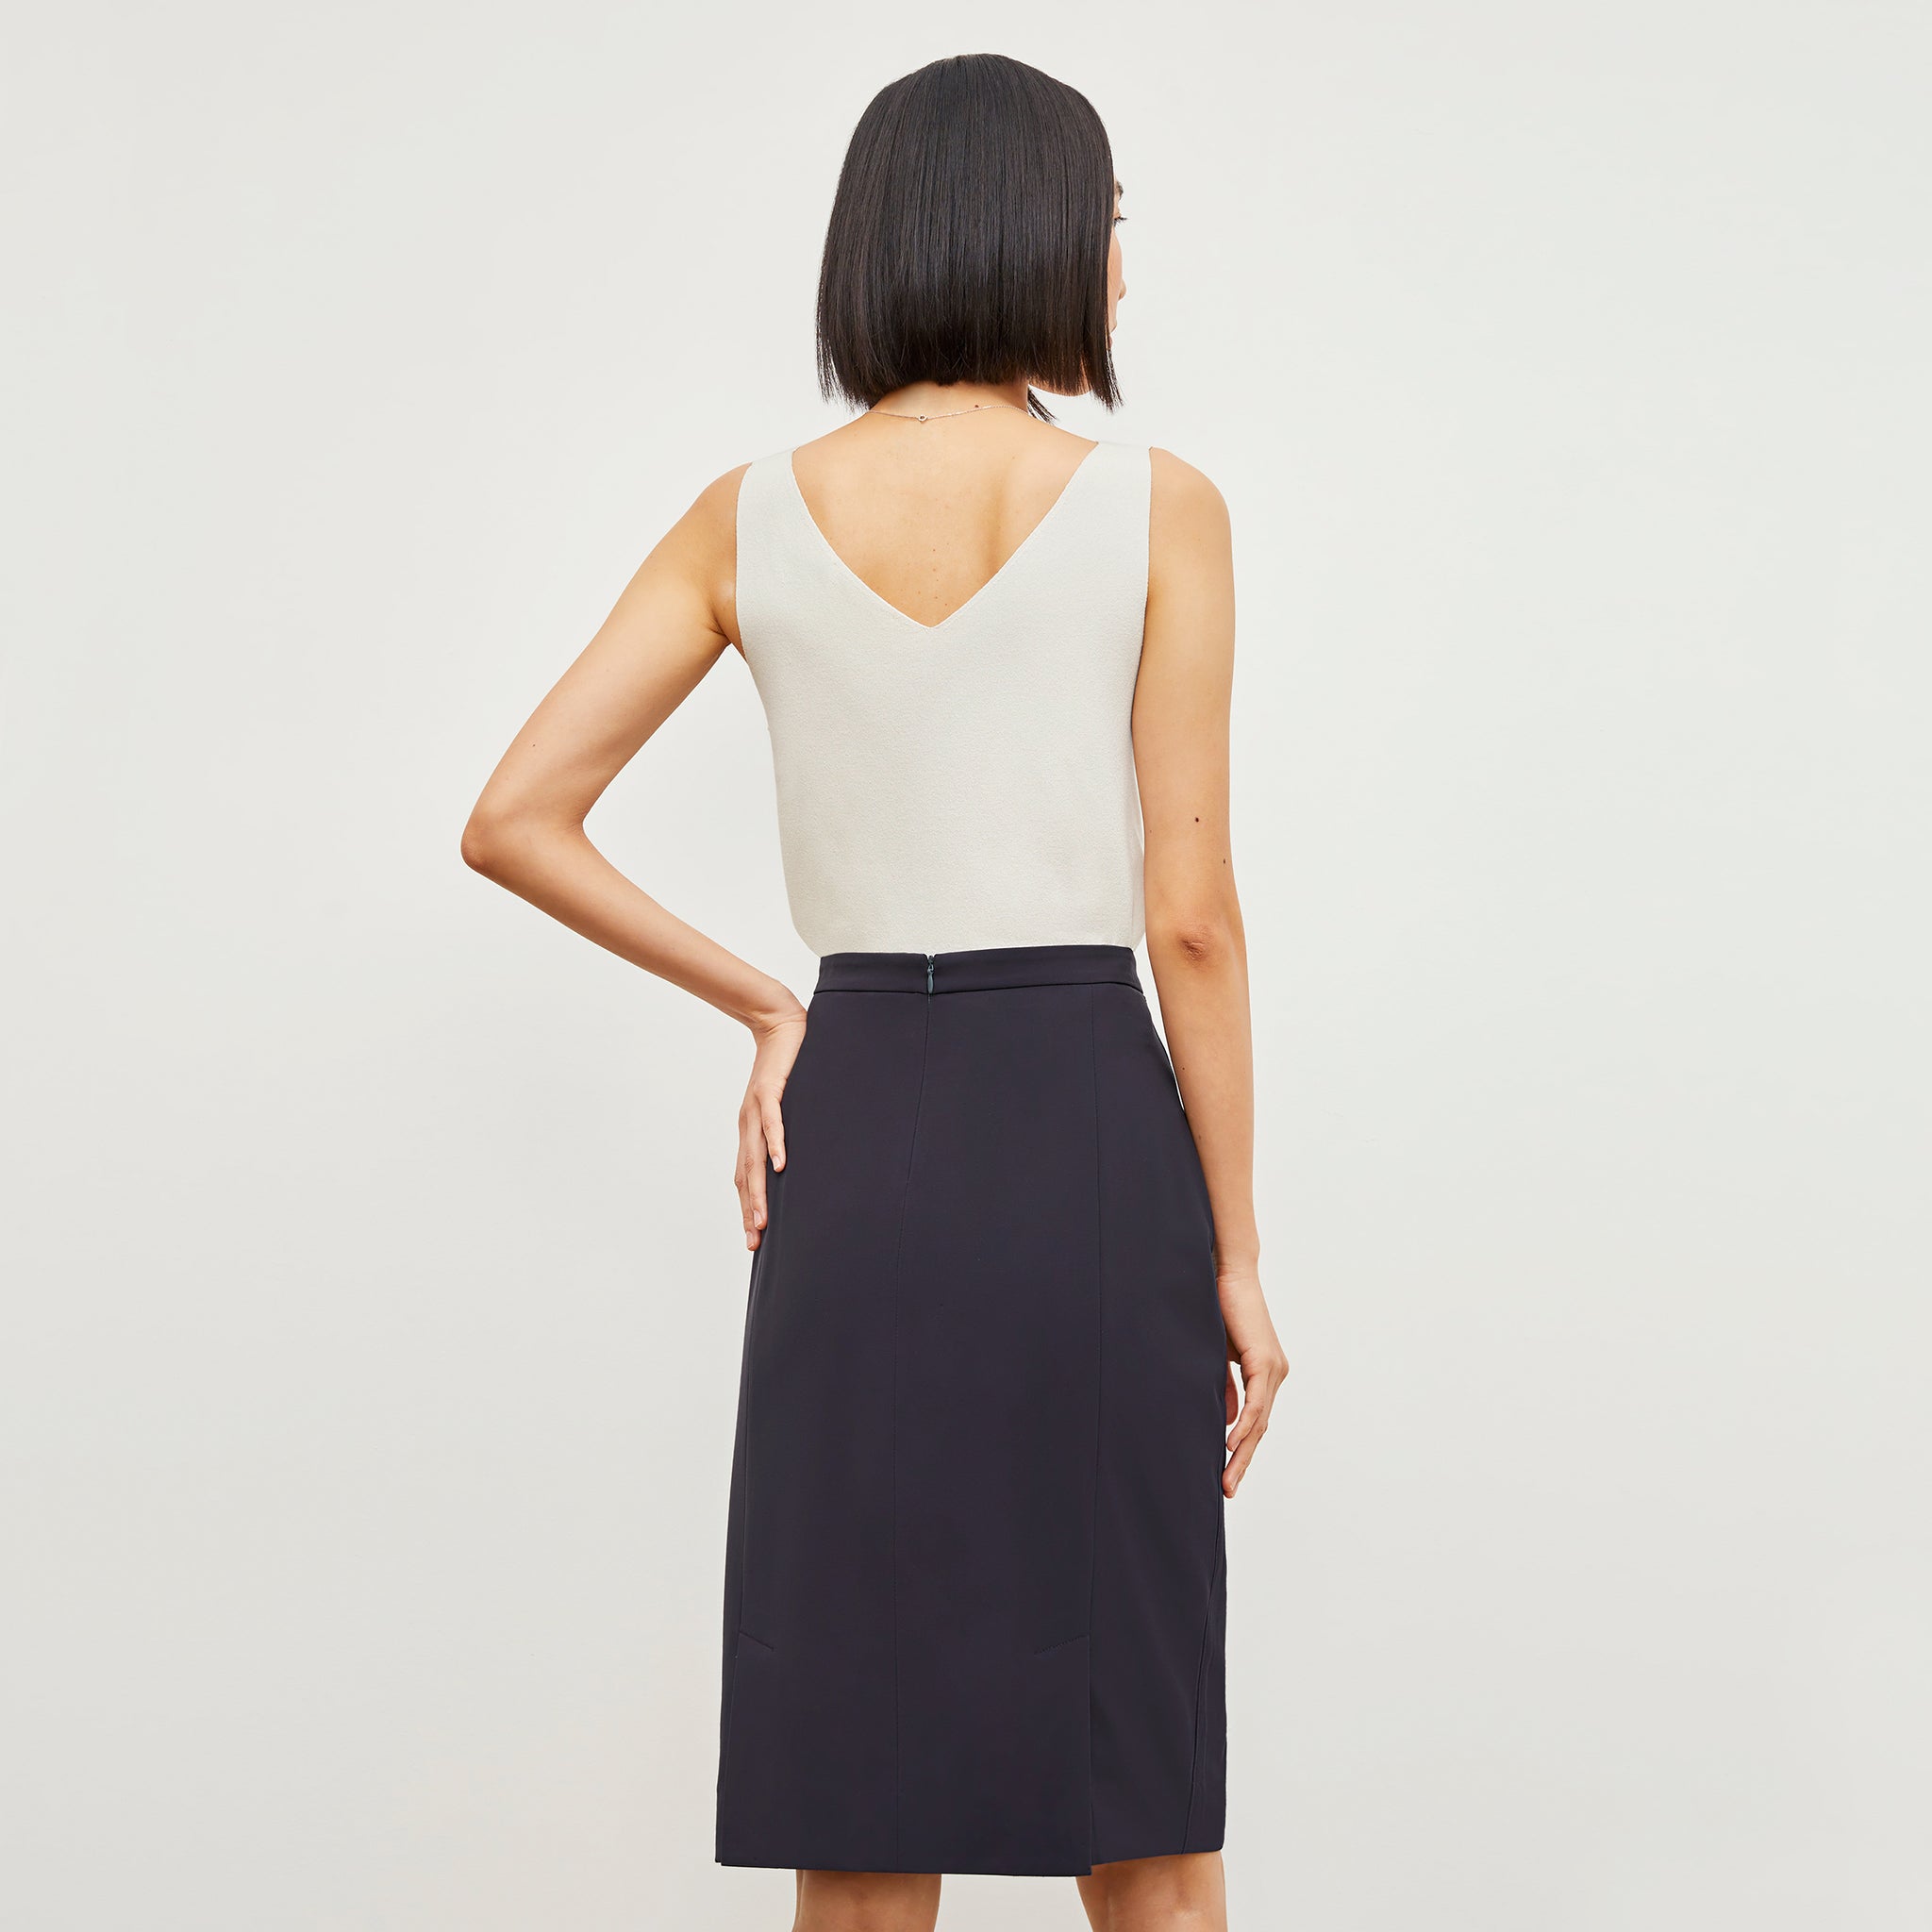 Back image of a woman wearing the Cobble Hill Skirt - OrigamiTech in Cool Charcoal